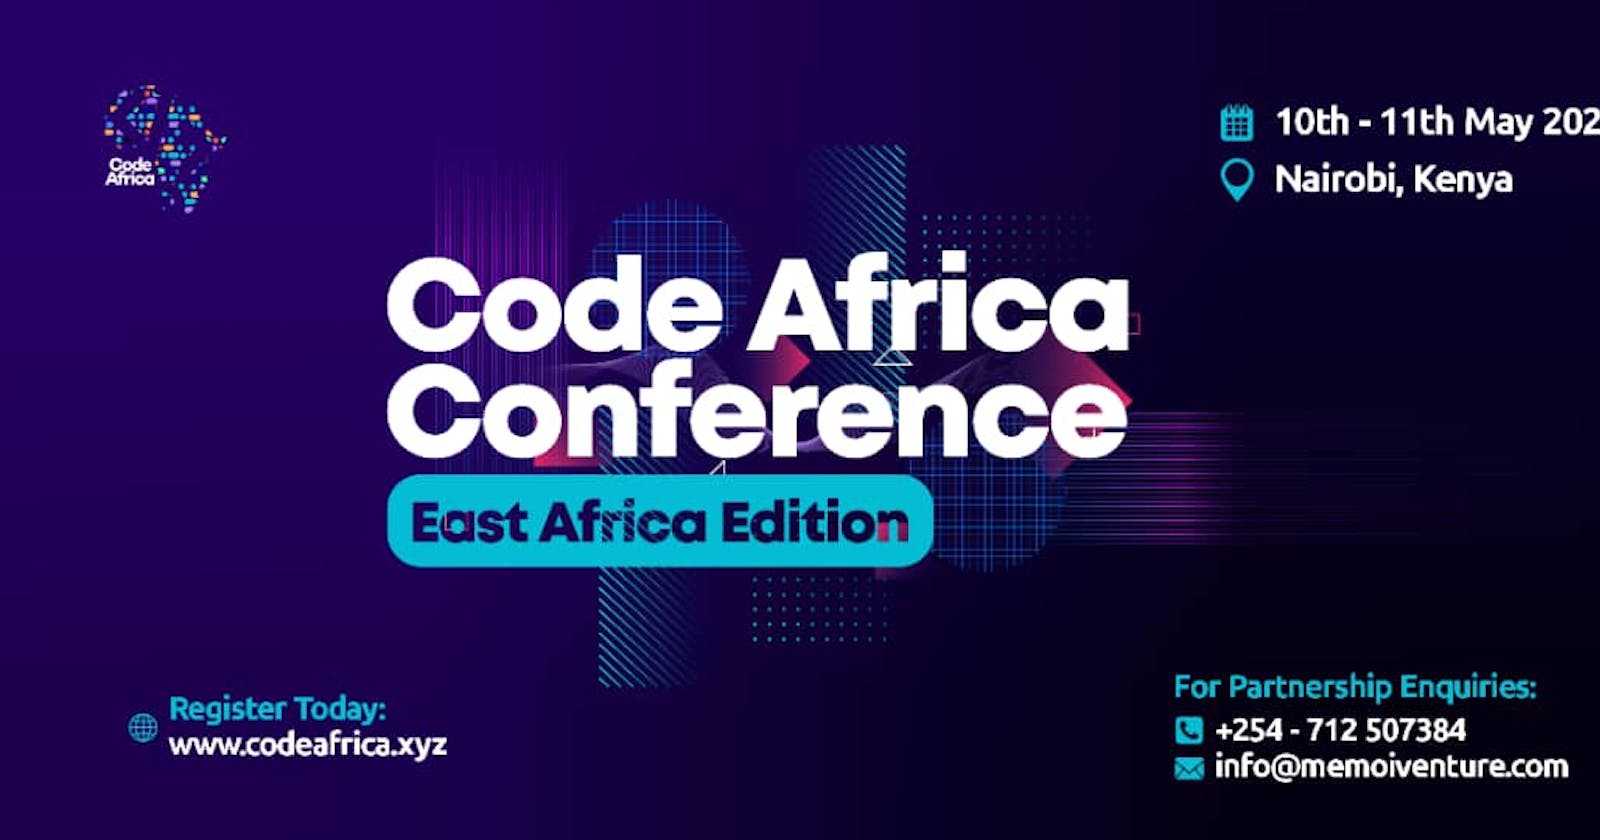 Unveiling: Memoi Africa Announces The Largest Gathering of Developers in Africa.